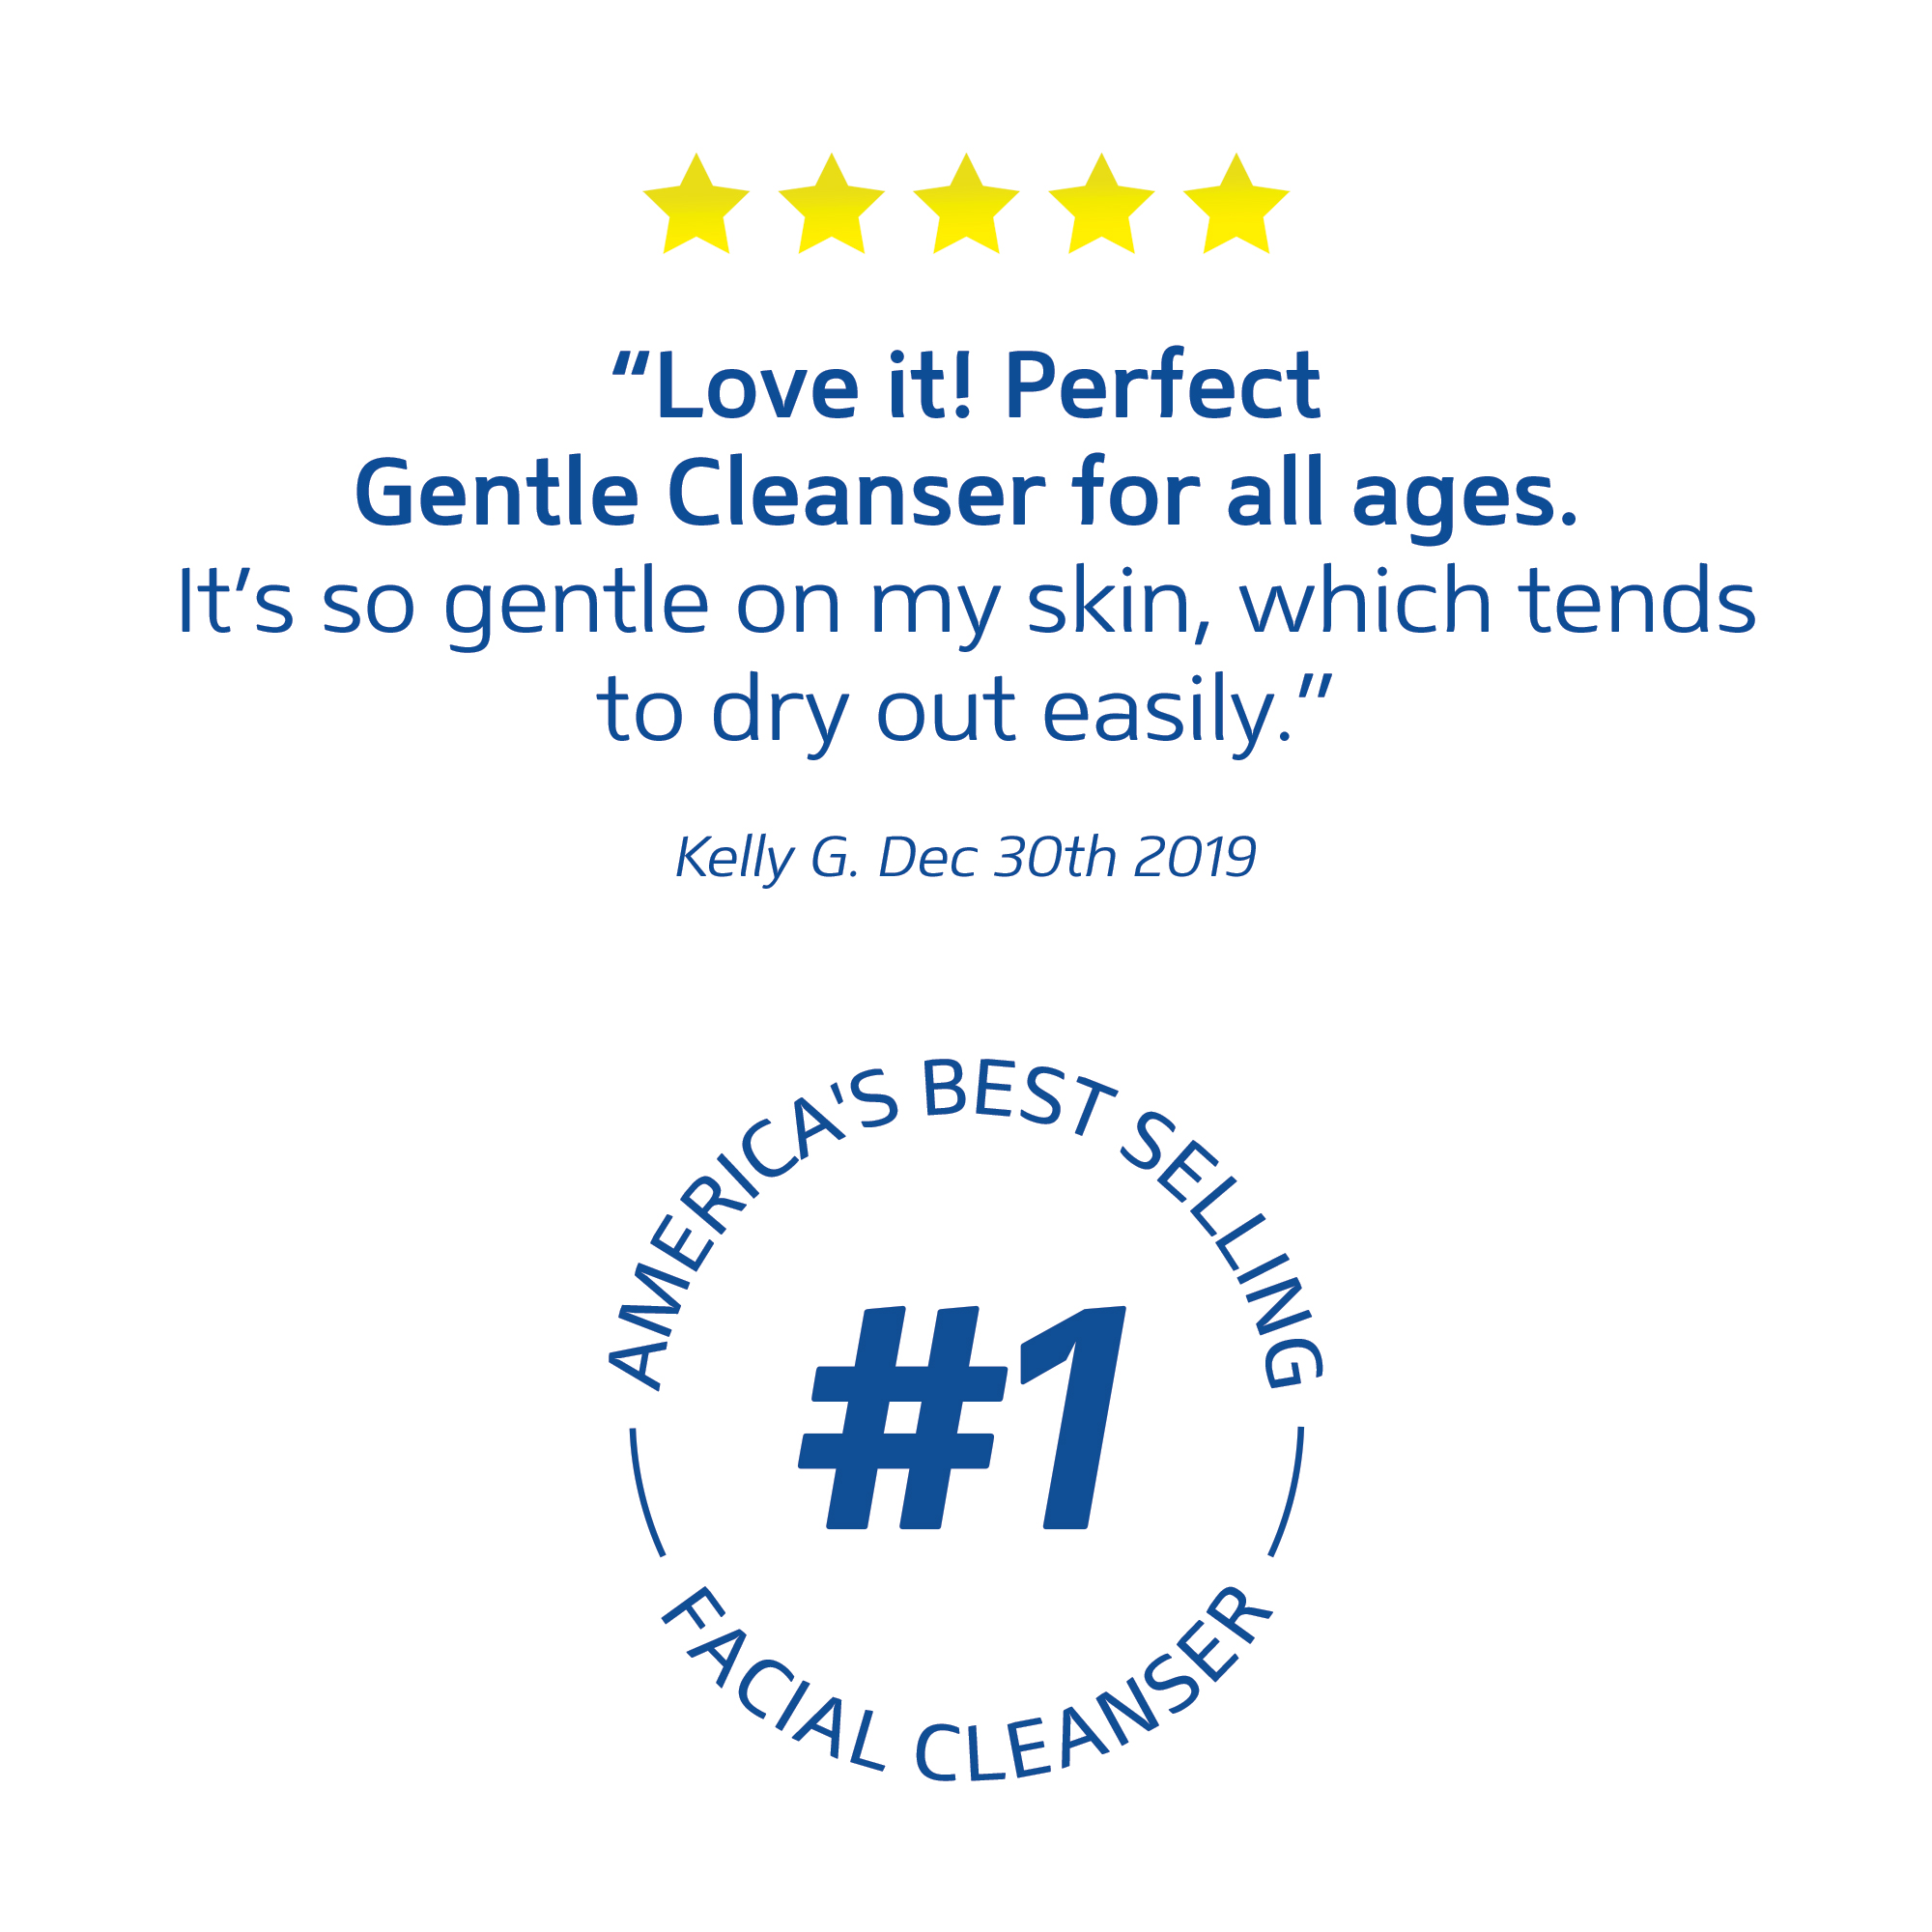 Cetaphil Gentle Skin Cleanser, Hydrating Face Wash & Body Wash, Ideal for Sensitive, Dry Skin, Fragrance-Free, Dermatologist Recommended, 16 fl oz - image 4 of 9